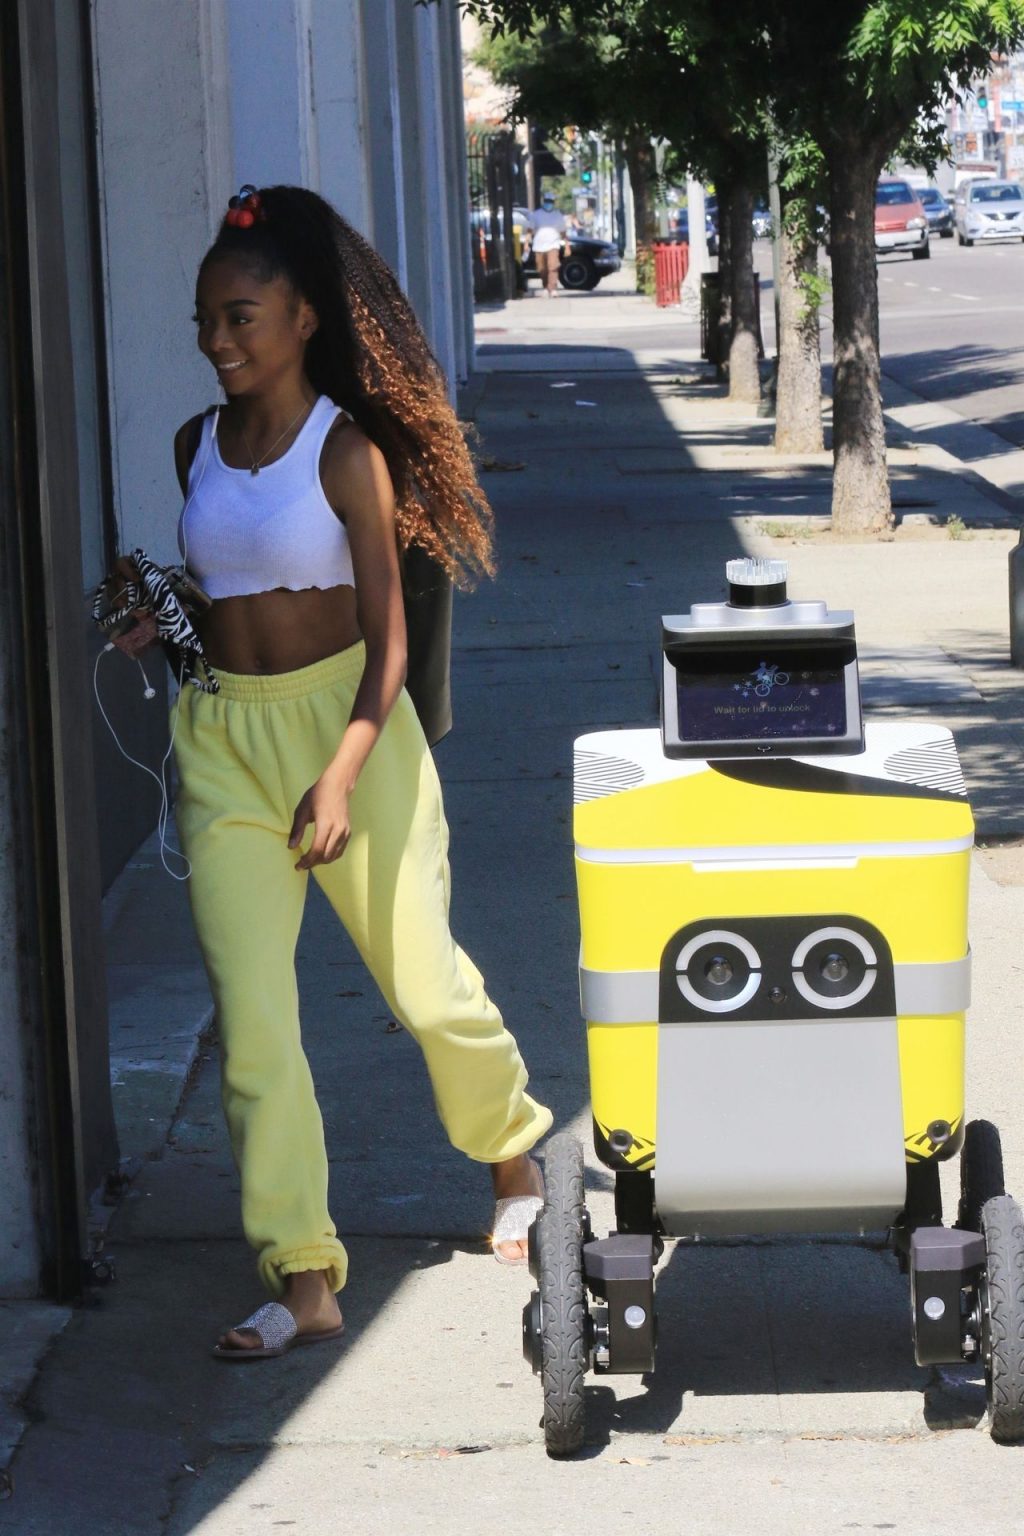 Skai Jackson Walks in With a Matching Postmates Delivery Cart (51 Photos)